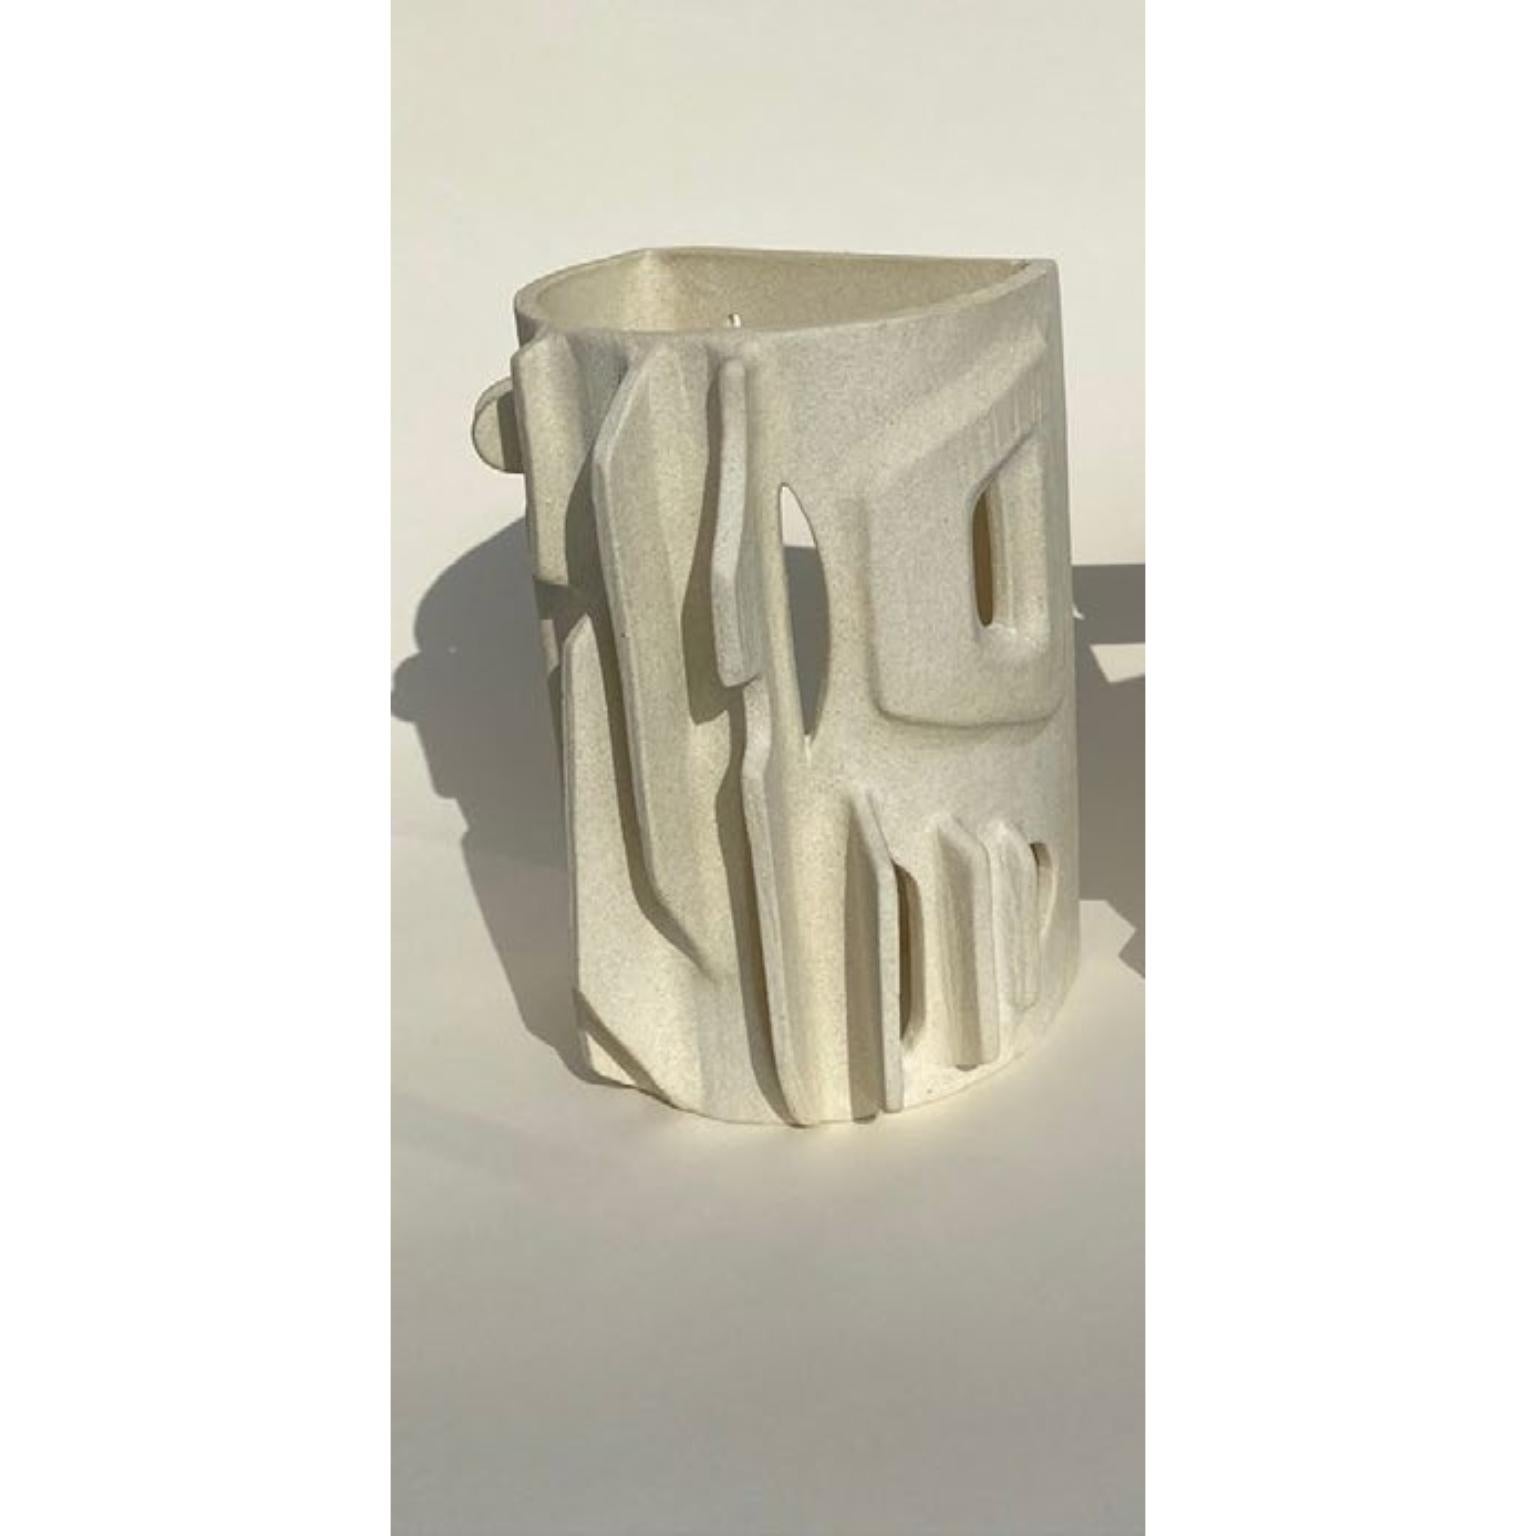 White sconce by Olivia Cognet
Materials: Ceramic
Dimensions: L 18 cm H 27 cm

Each of Olivia’s handmade creations is a unique work of art, the snapshot of a precious moment captured in a world of fast ‘everything’.
Since moving to Los Angeles in